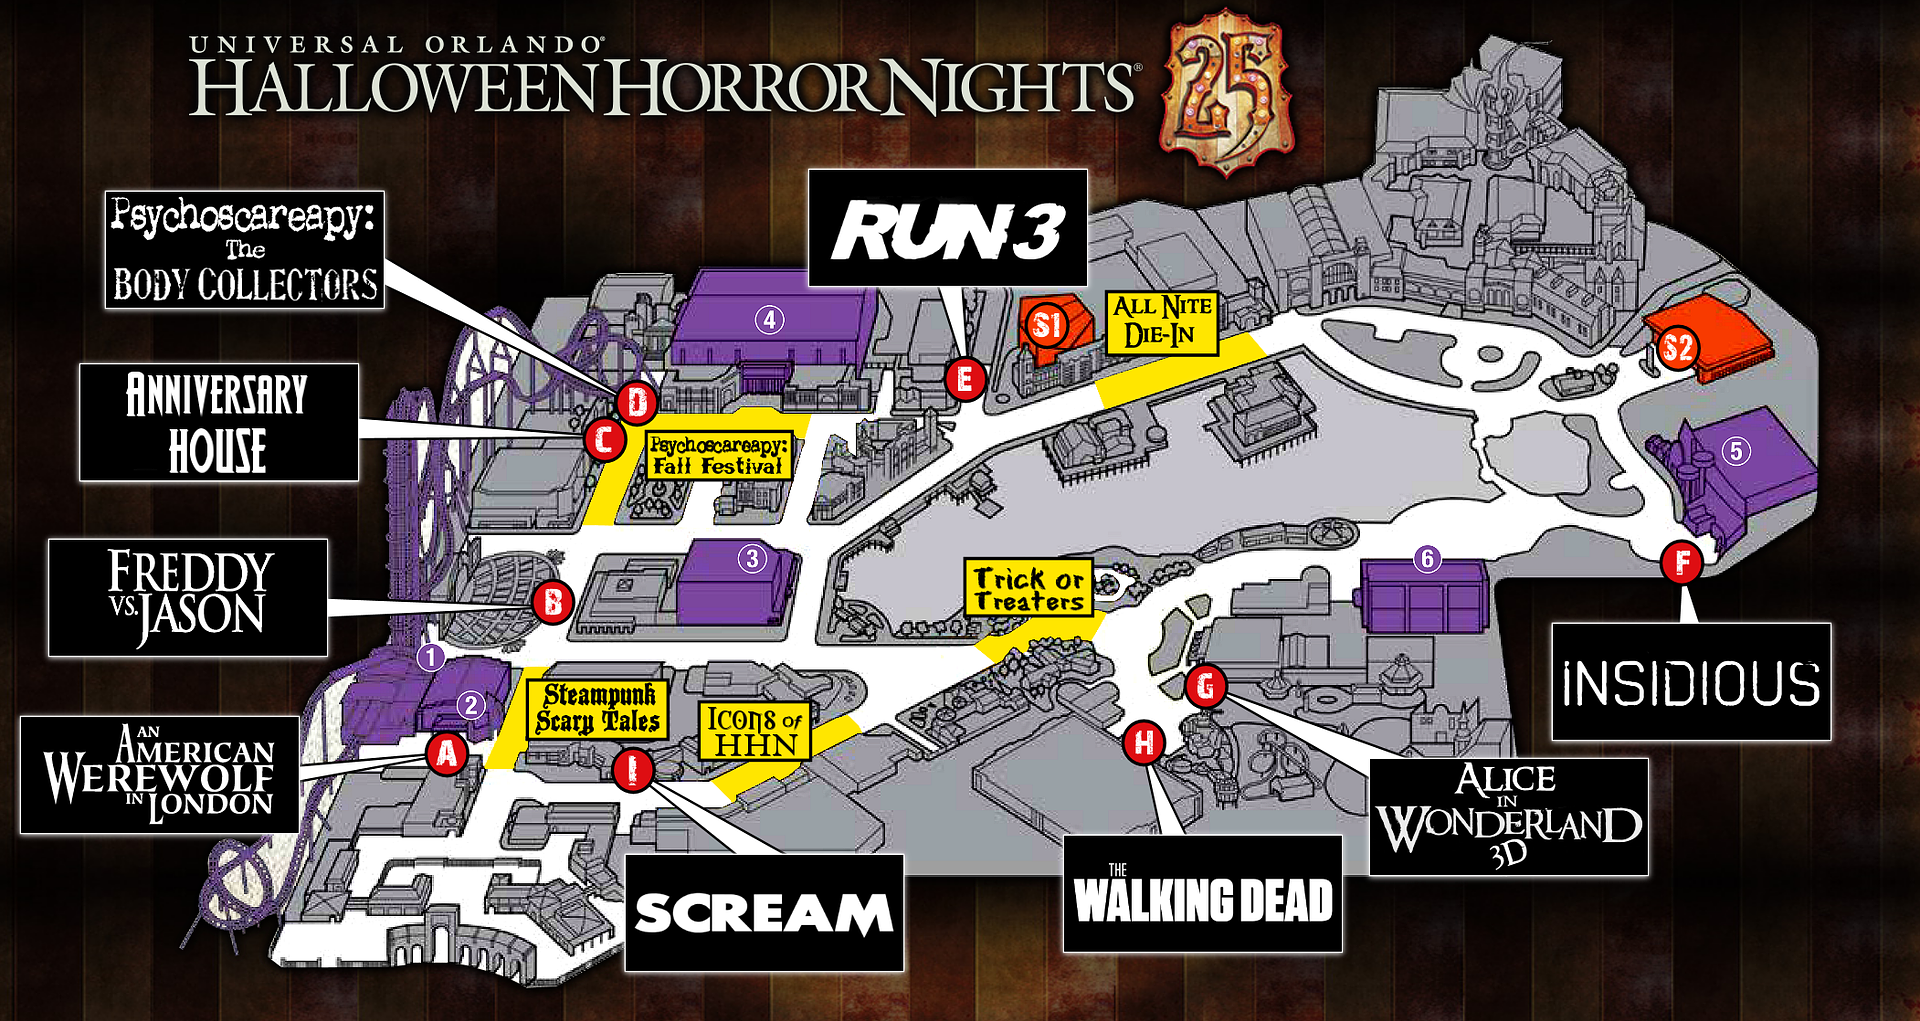 HHN%2025%20Speculation%20Map_2.png